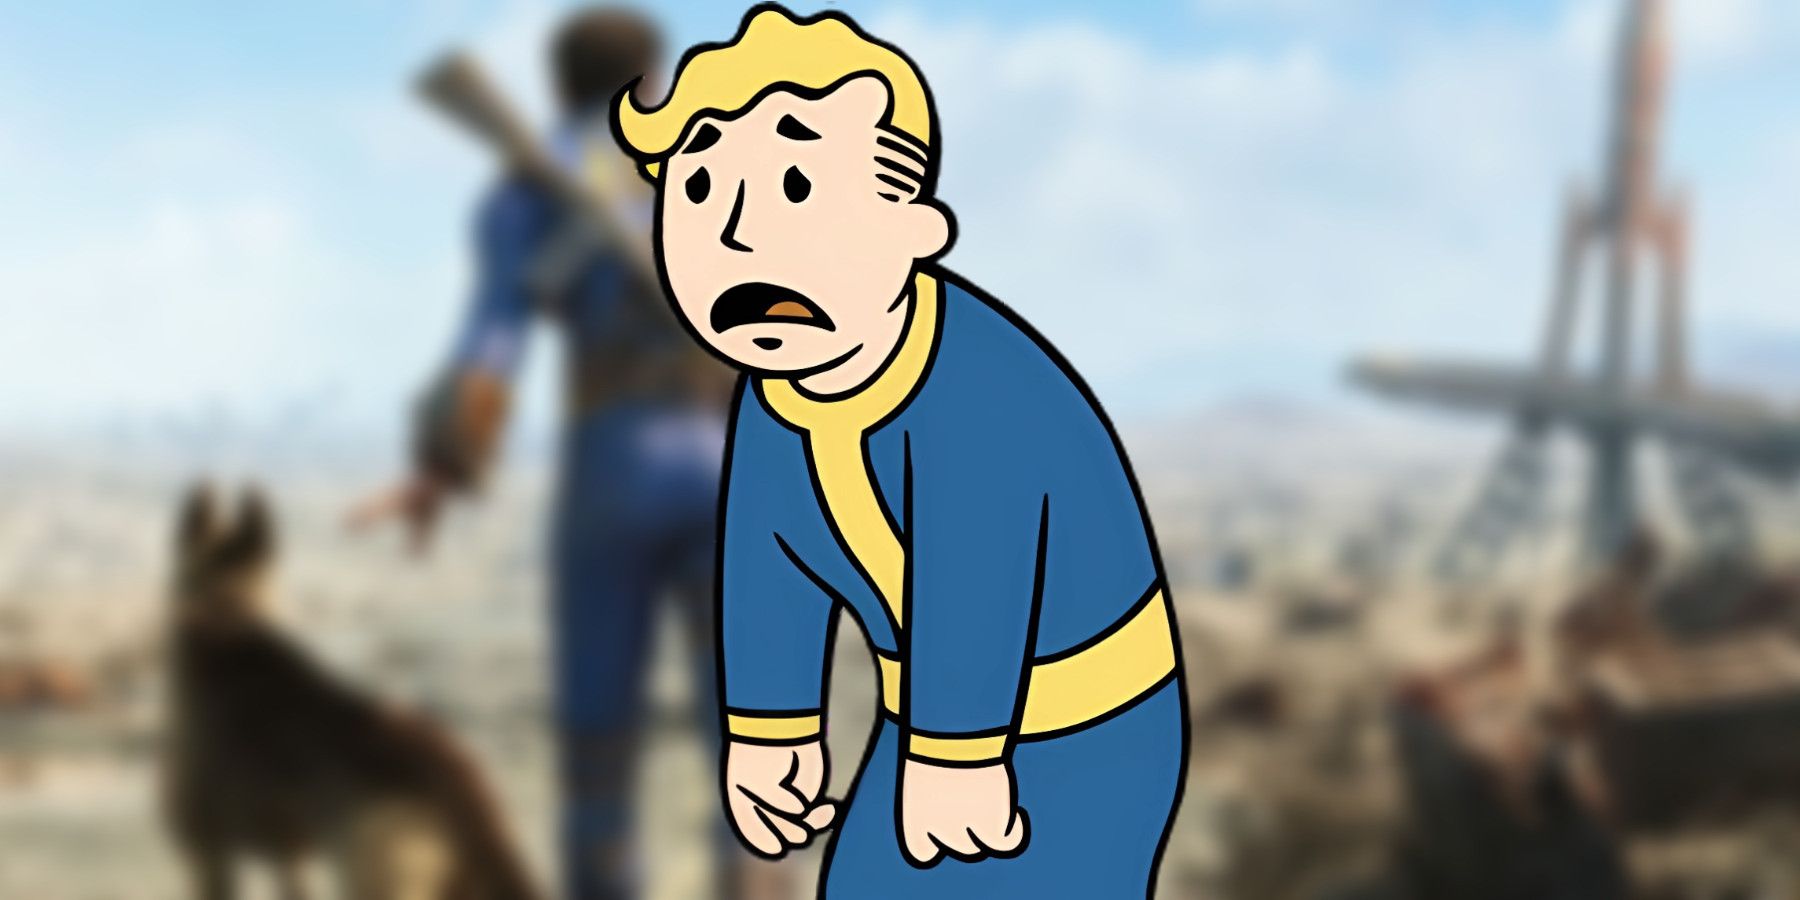 sad vault boy with fallout 4 background